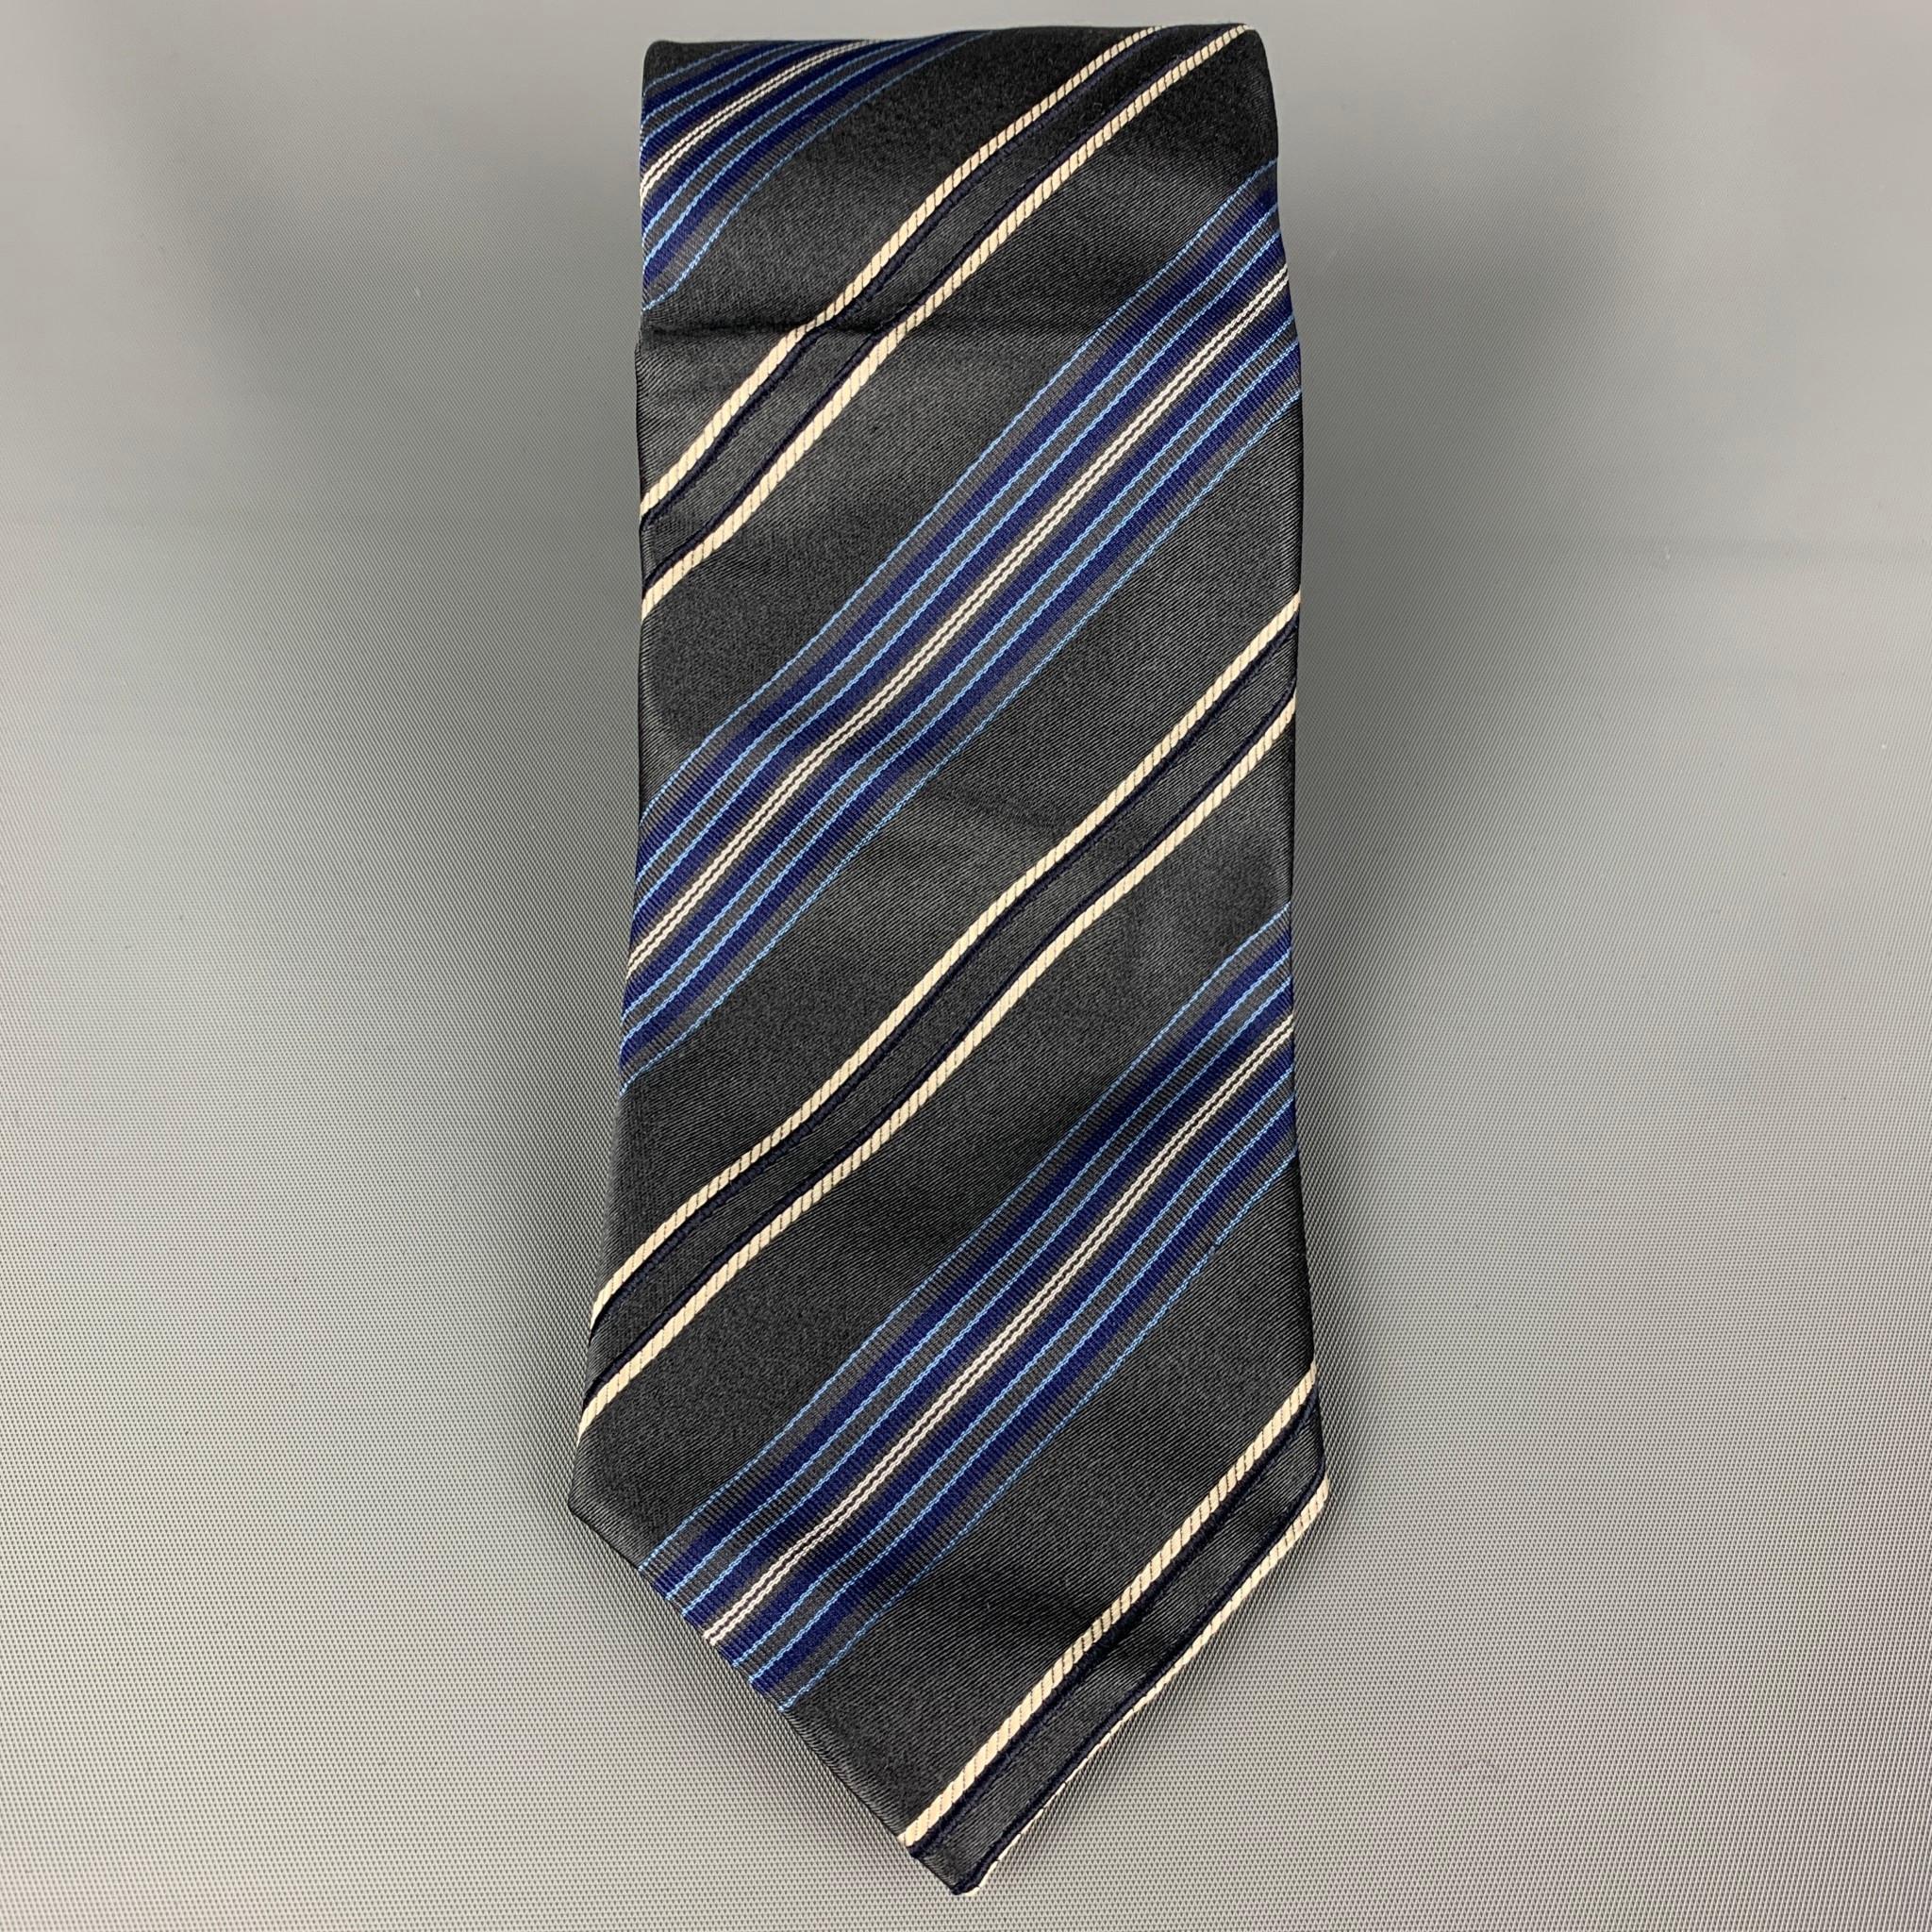 CANALI neck tie comes in a grey & blue diagonal stripe silk. Made in Italy. 

New With Tags. 
Original Retail Price: $150.00

Measurements:

Width: 3.25 in. 